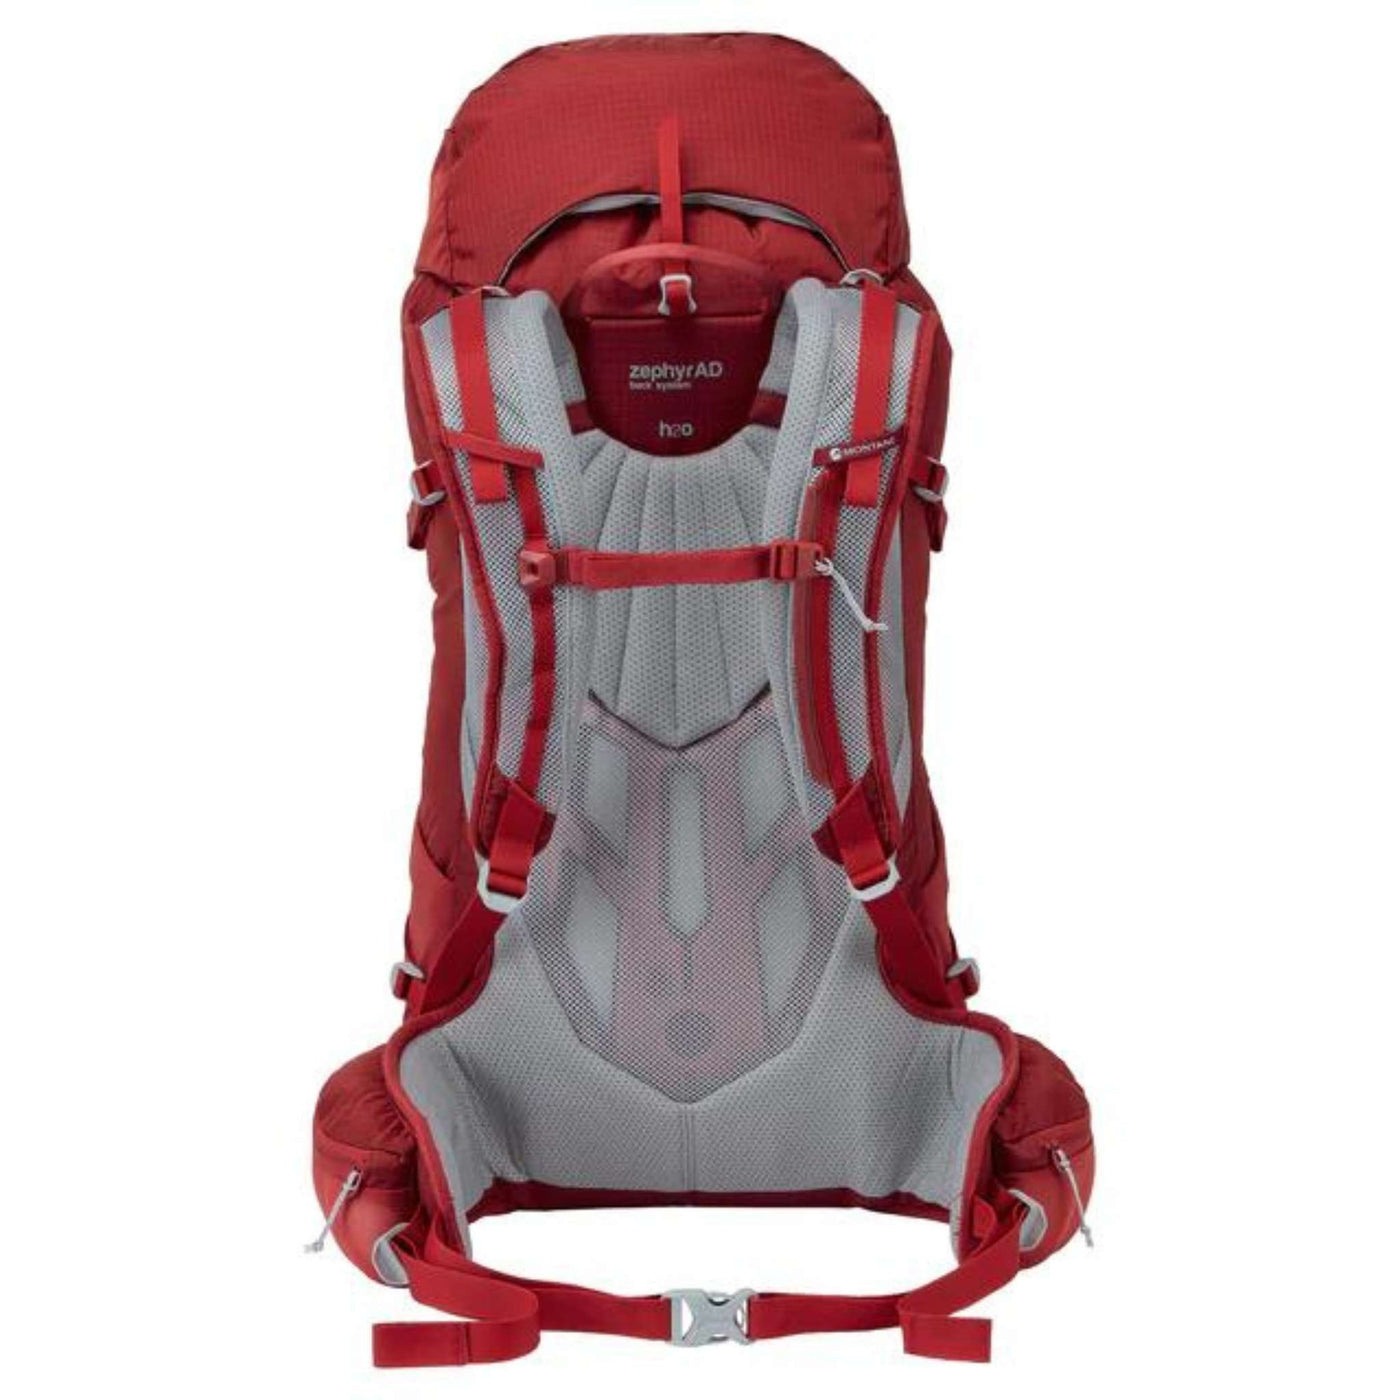 Montane Azote 32 | 32L Day Pack & Minimalist Overnight Pack NZ | Montane NZ | Further Faster Christchurch NZ #acer-red